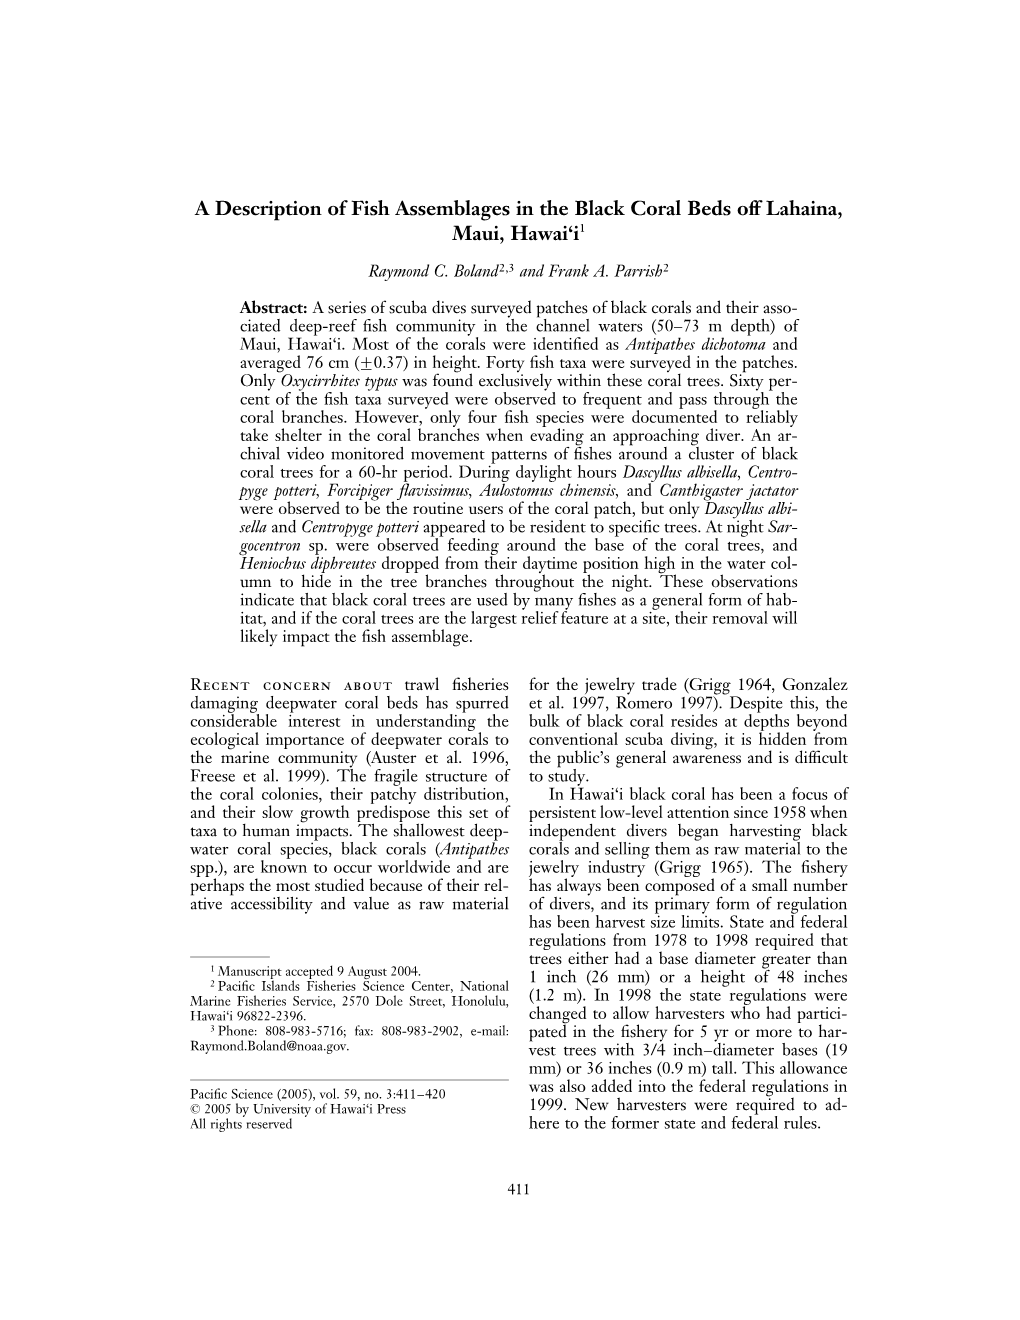 A Description of Fish Assemblages in the Black Coral Beds Off Lahaina, Maui, Hawai'i1